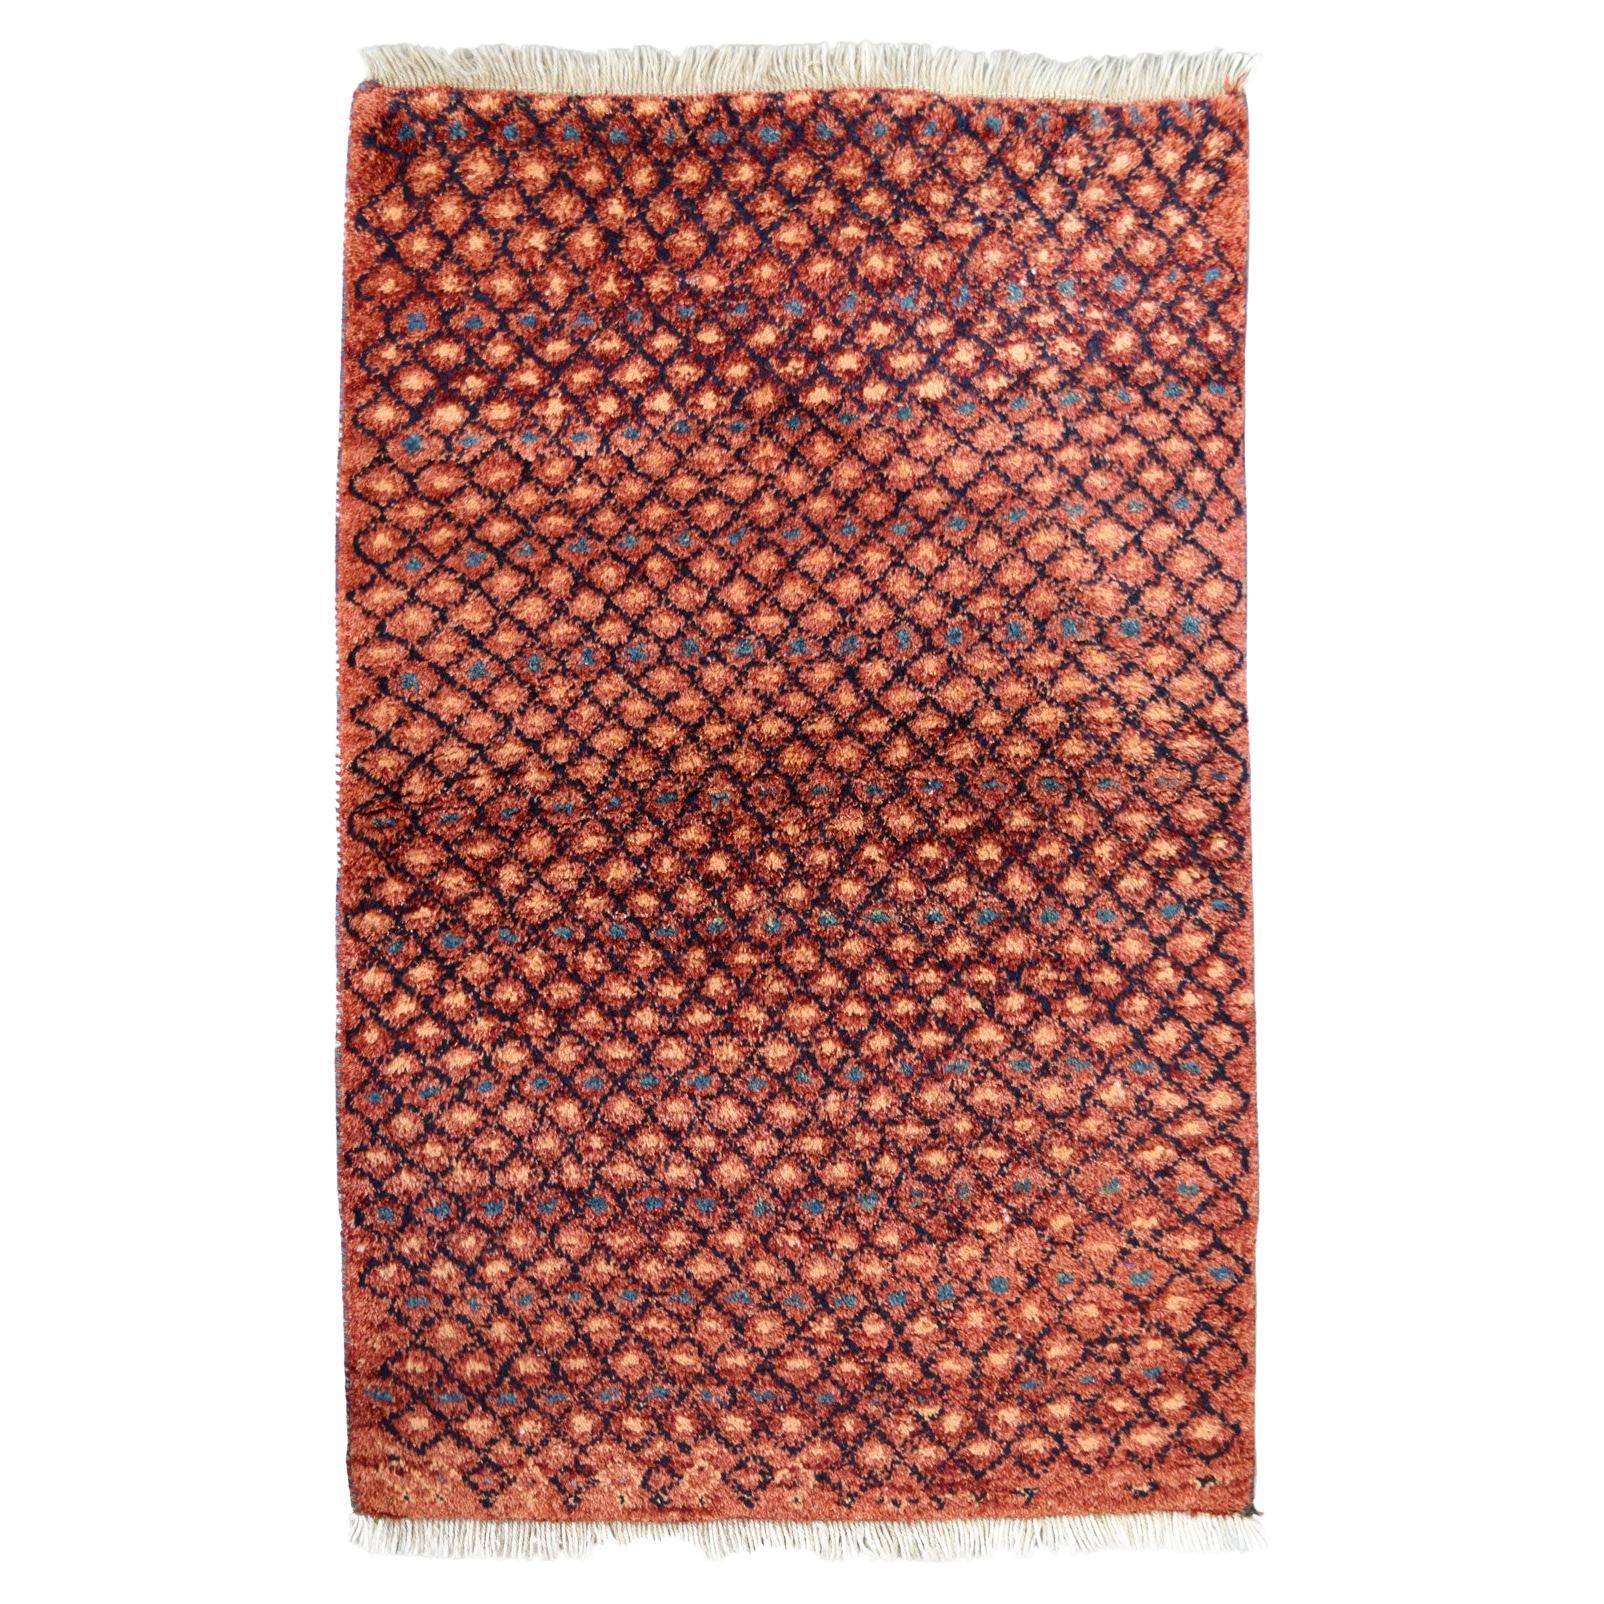 Red Persian Gabbeh Tribal Rug, Hand-knotted Wool, 3' x 4'